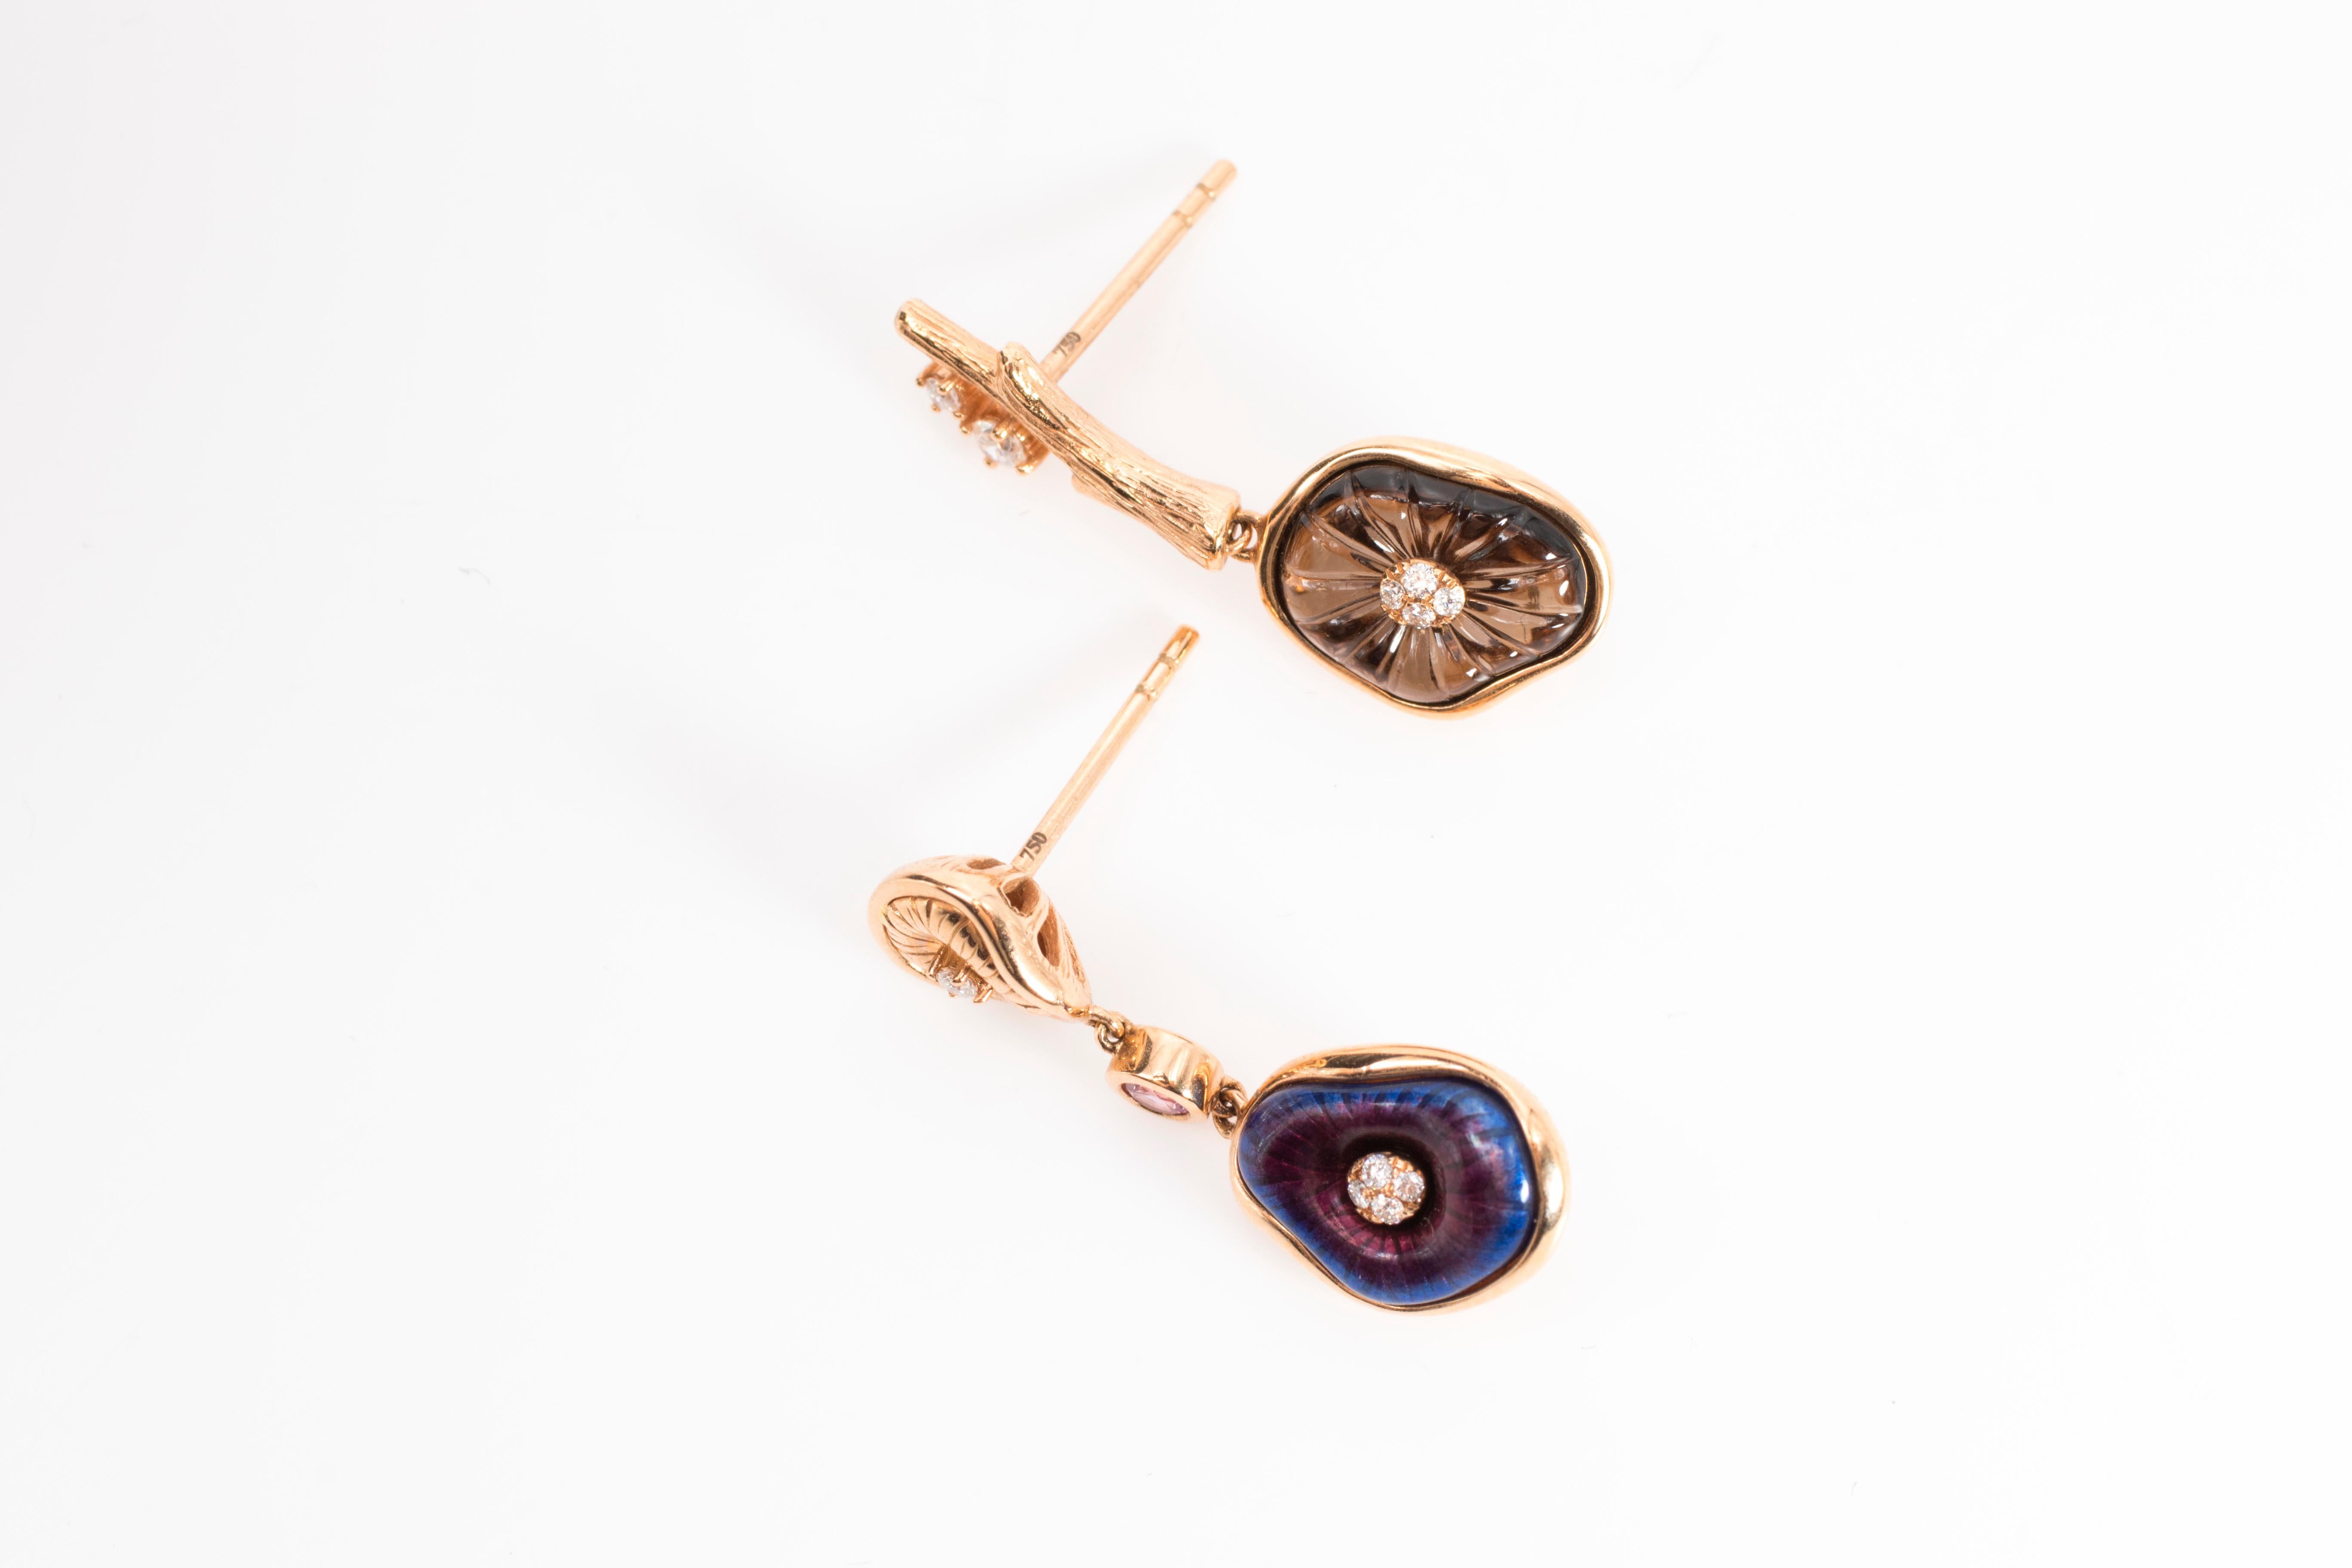 18 Karat Rose Gold Enamel Mushroom Earrings with Sapphire, Quartz and Diamond In New Condition For Sale In Hong Kong, APAC - East Asia